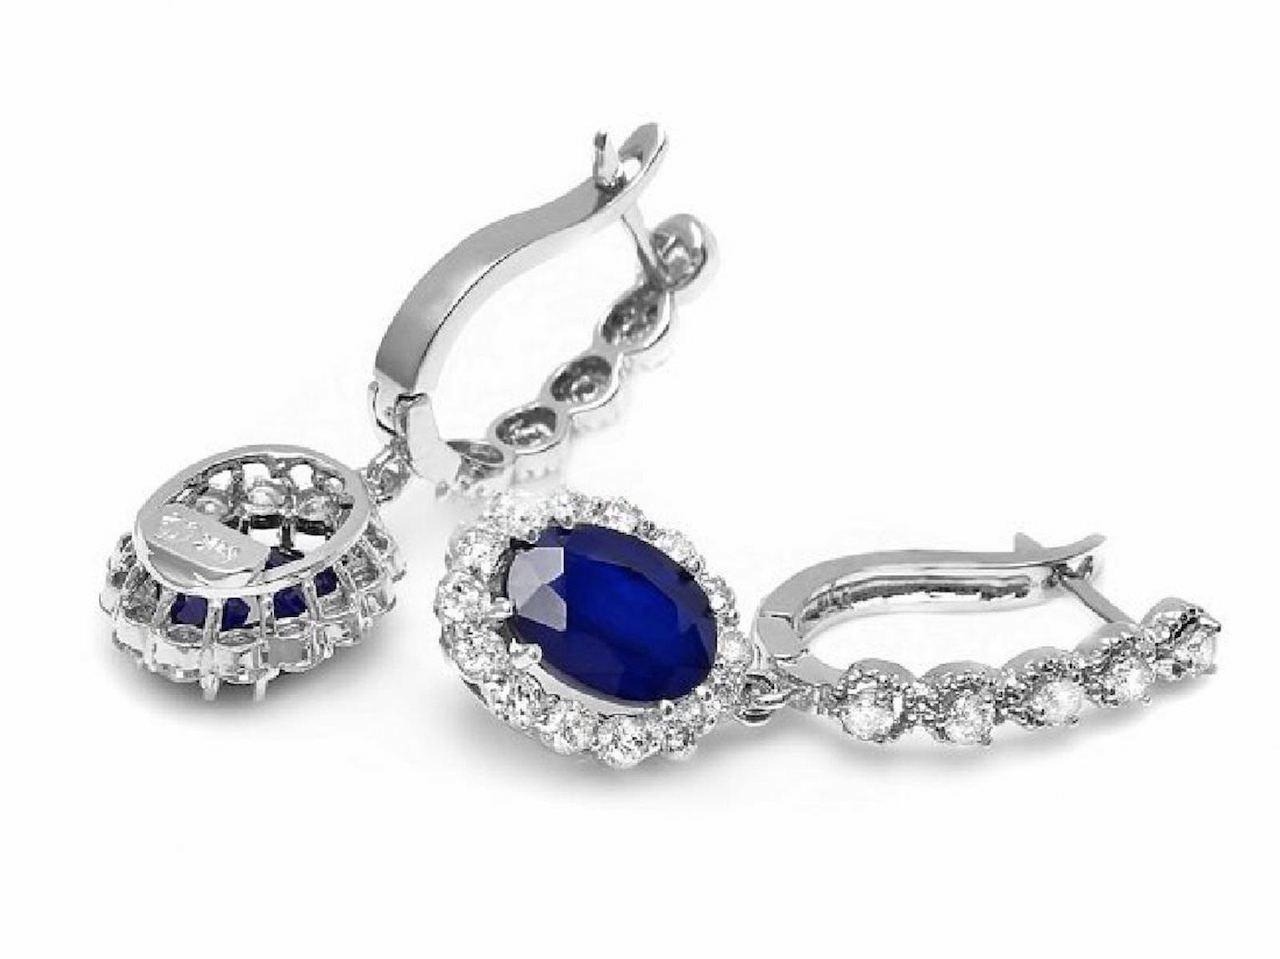 Exquisite 5.70 Carats Natural Sapphire and Diamond 14K Solid White Gold Earrings

Amazing looking piece!

Total Natural Round Cut White Diamonds Weight: Approx. 1.20 Carats (color G-H / Clarity SI1-SI2)

Total Natural Oval Cut Sapphires Weight: